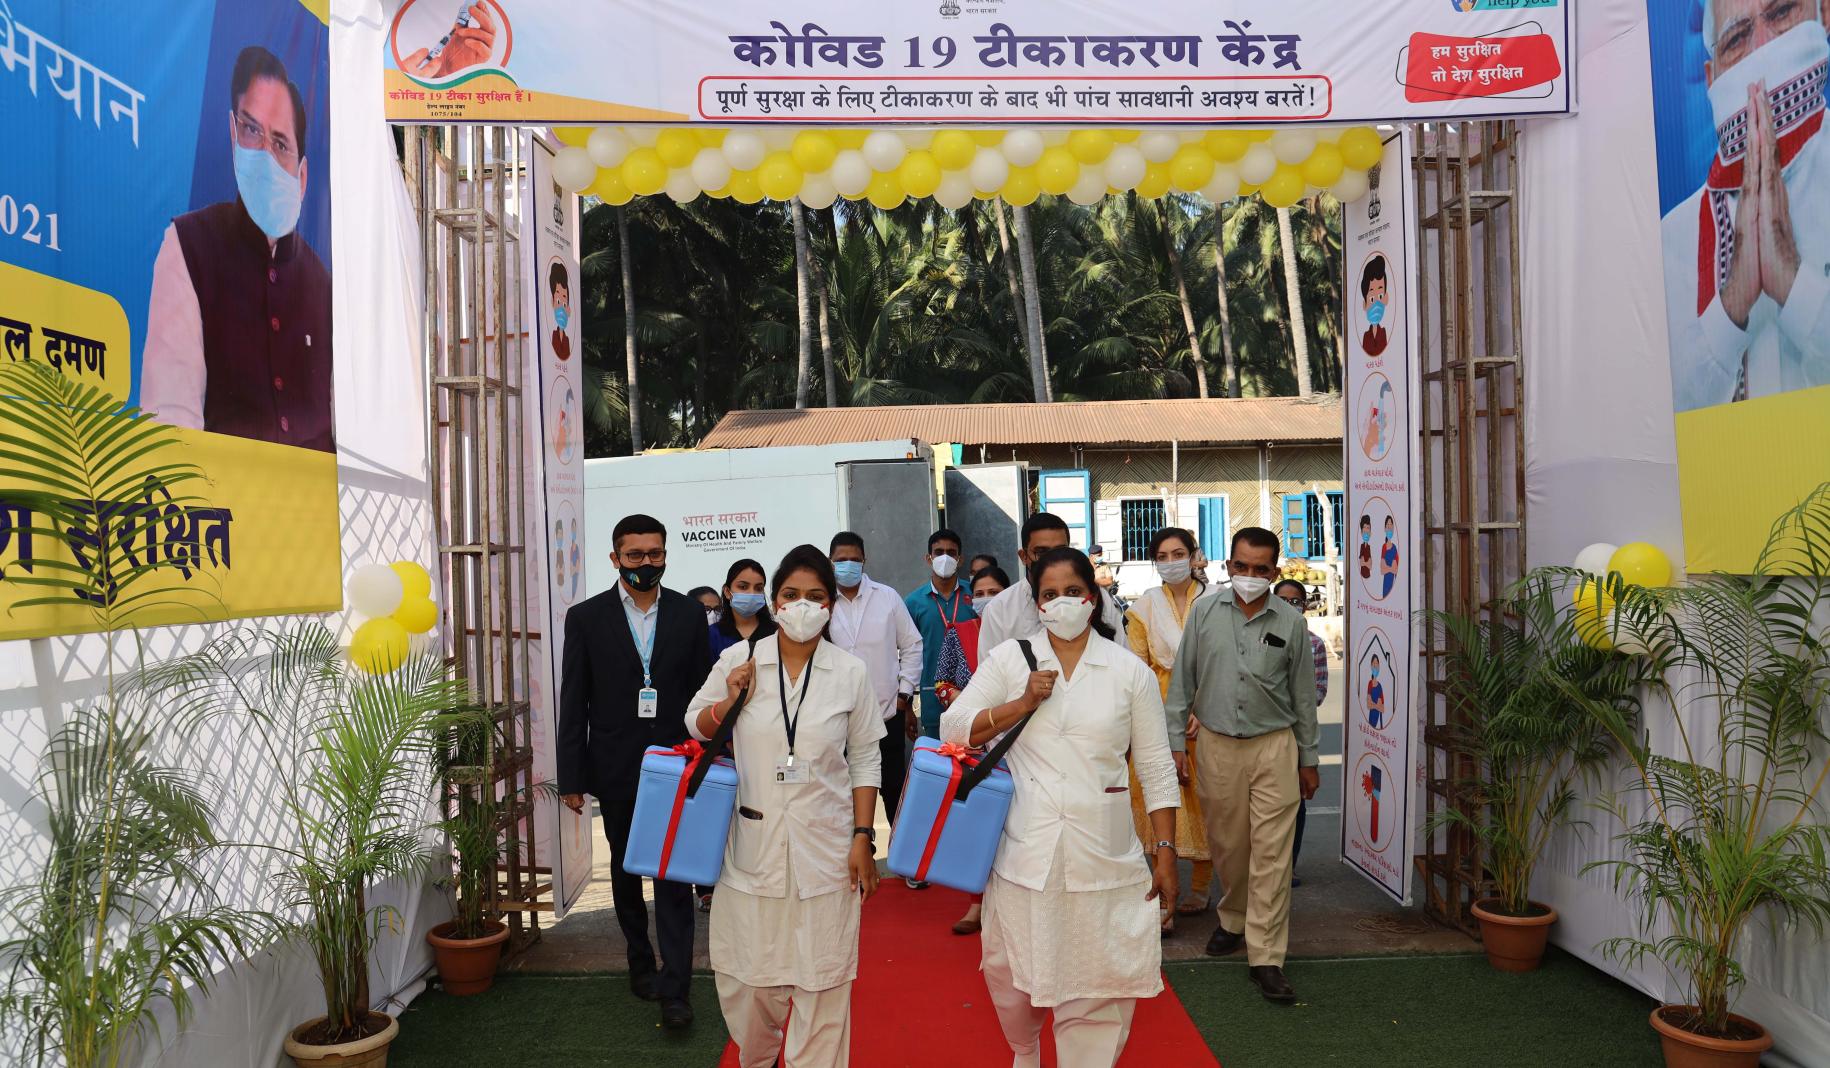 Two female healthcare workers wearing face masks walk towards the camera as they walk on a red carpet carrying vaccines as a group of people also wearing face masks follow behind them. 